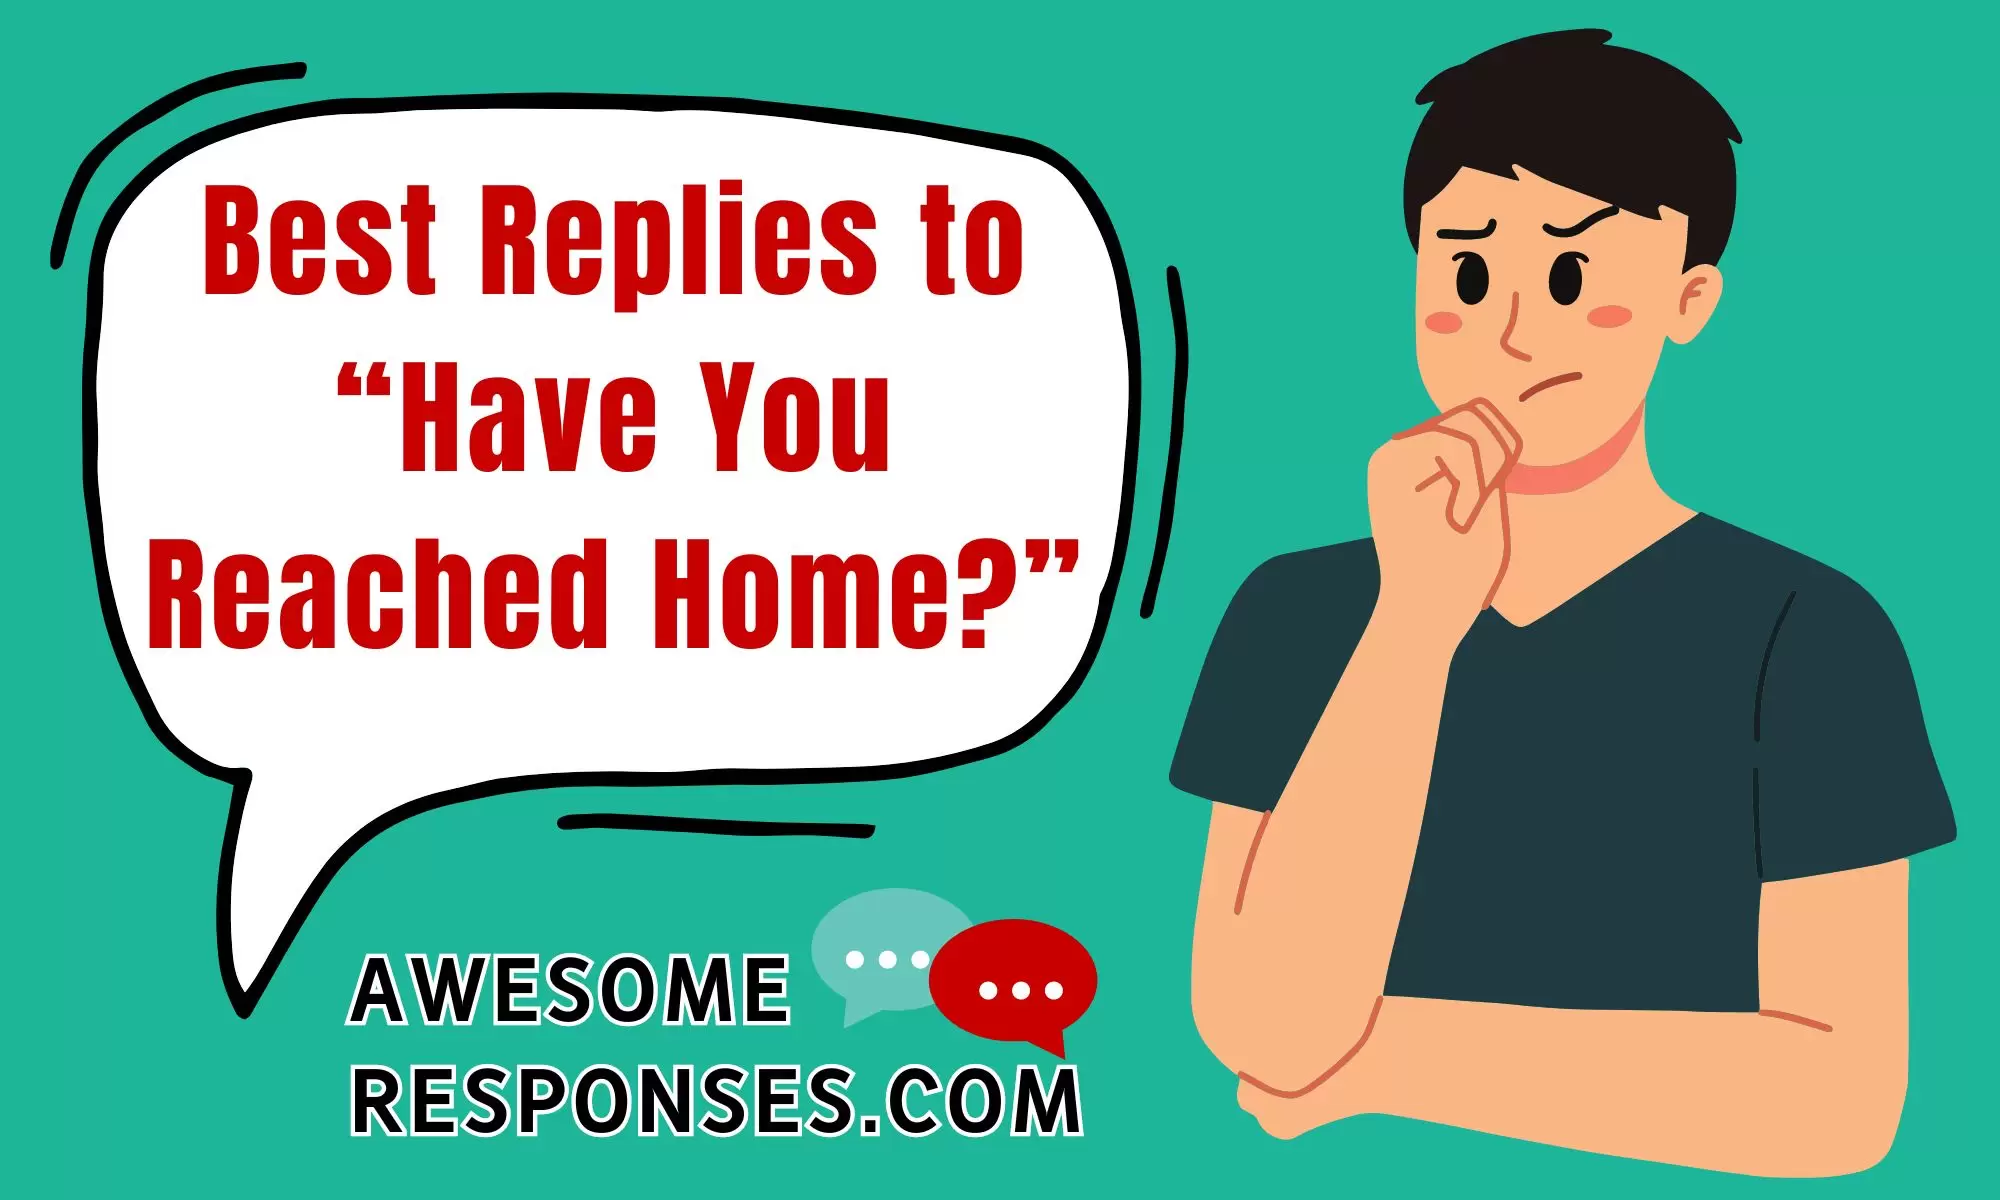 Best Replies to “Have You Reached Home?”